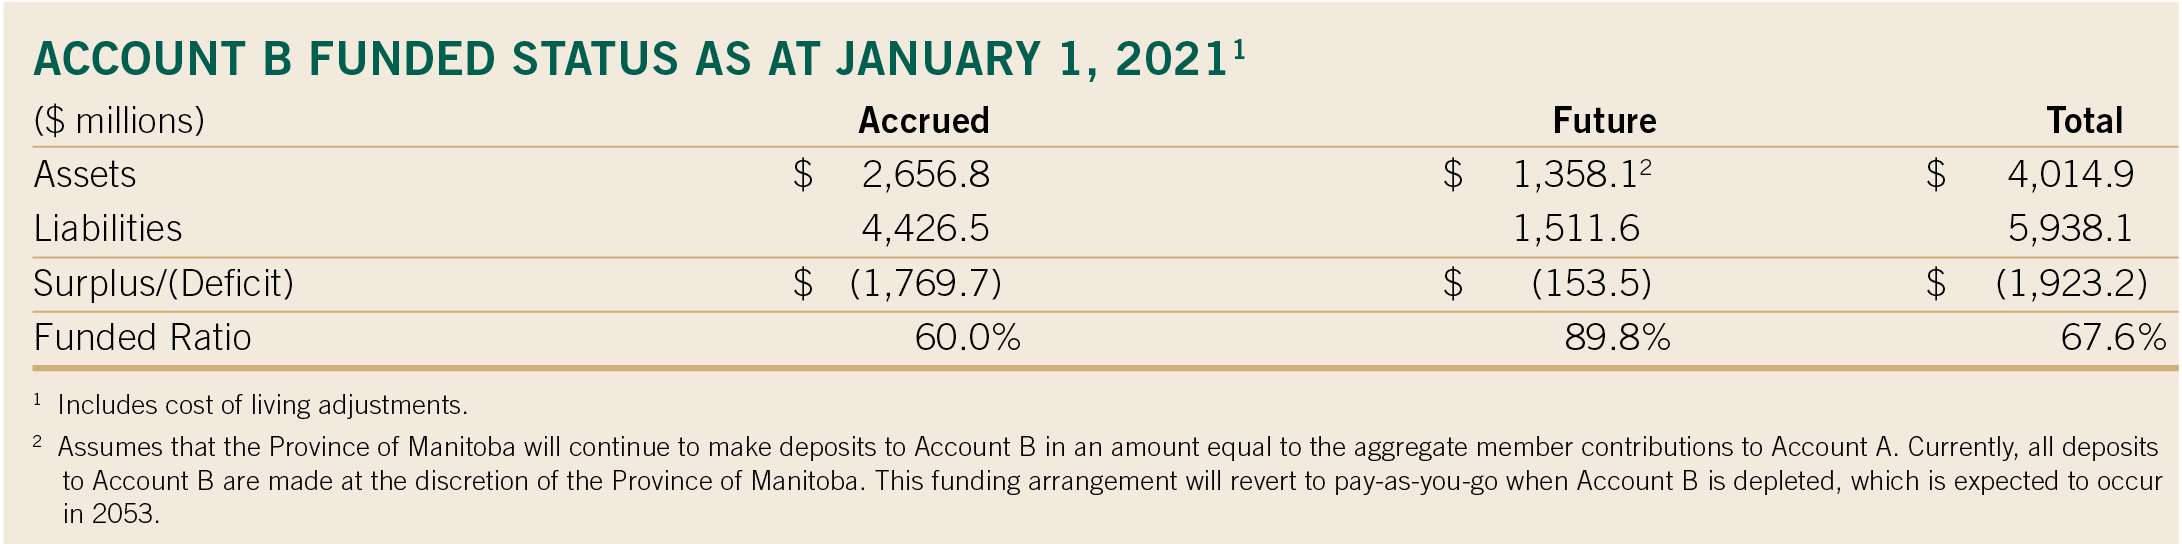 Account B funded status as at January 1, 2021 table image